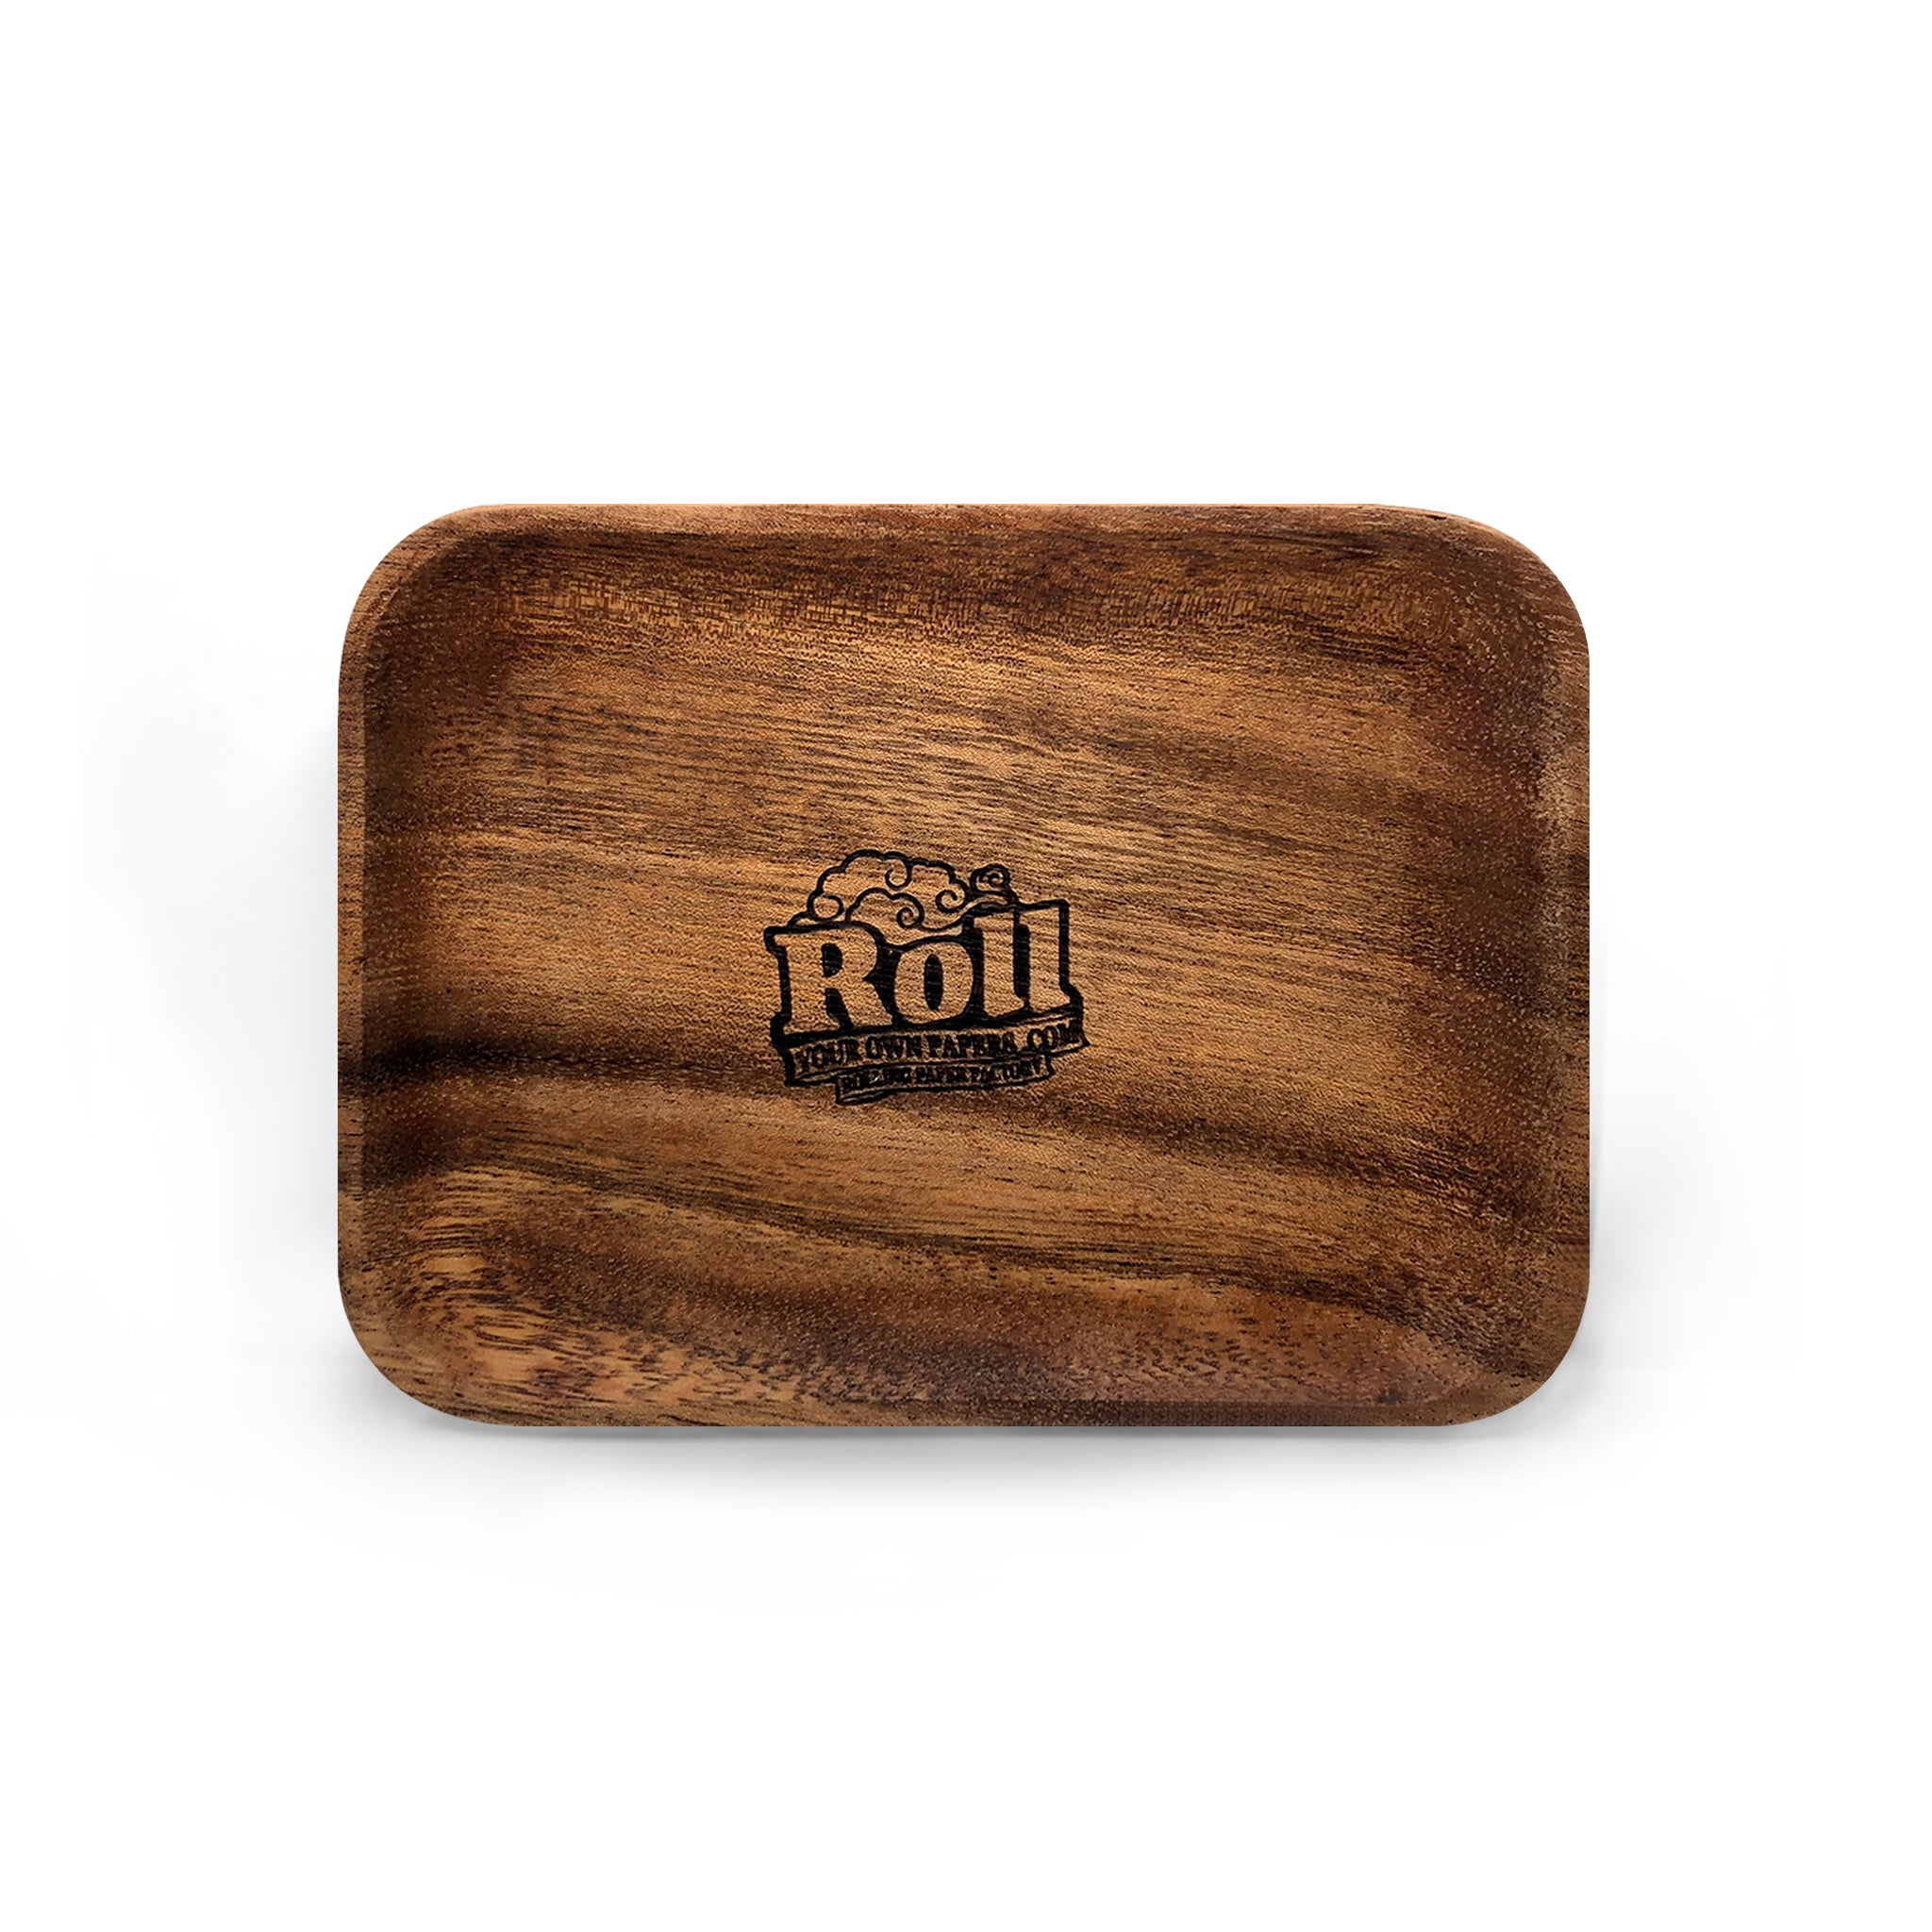 RAW Brand Small Wood Pre-Roll Rolling Tray